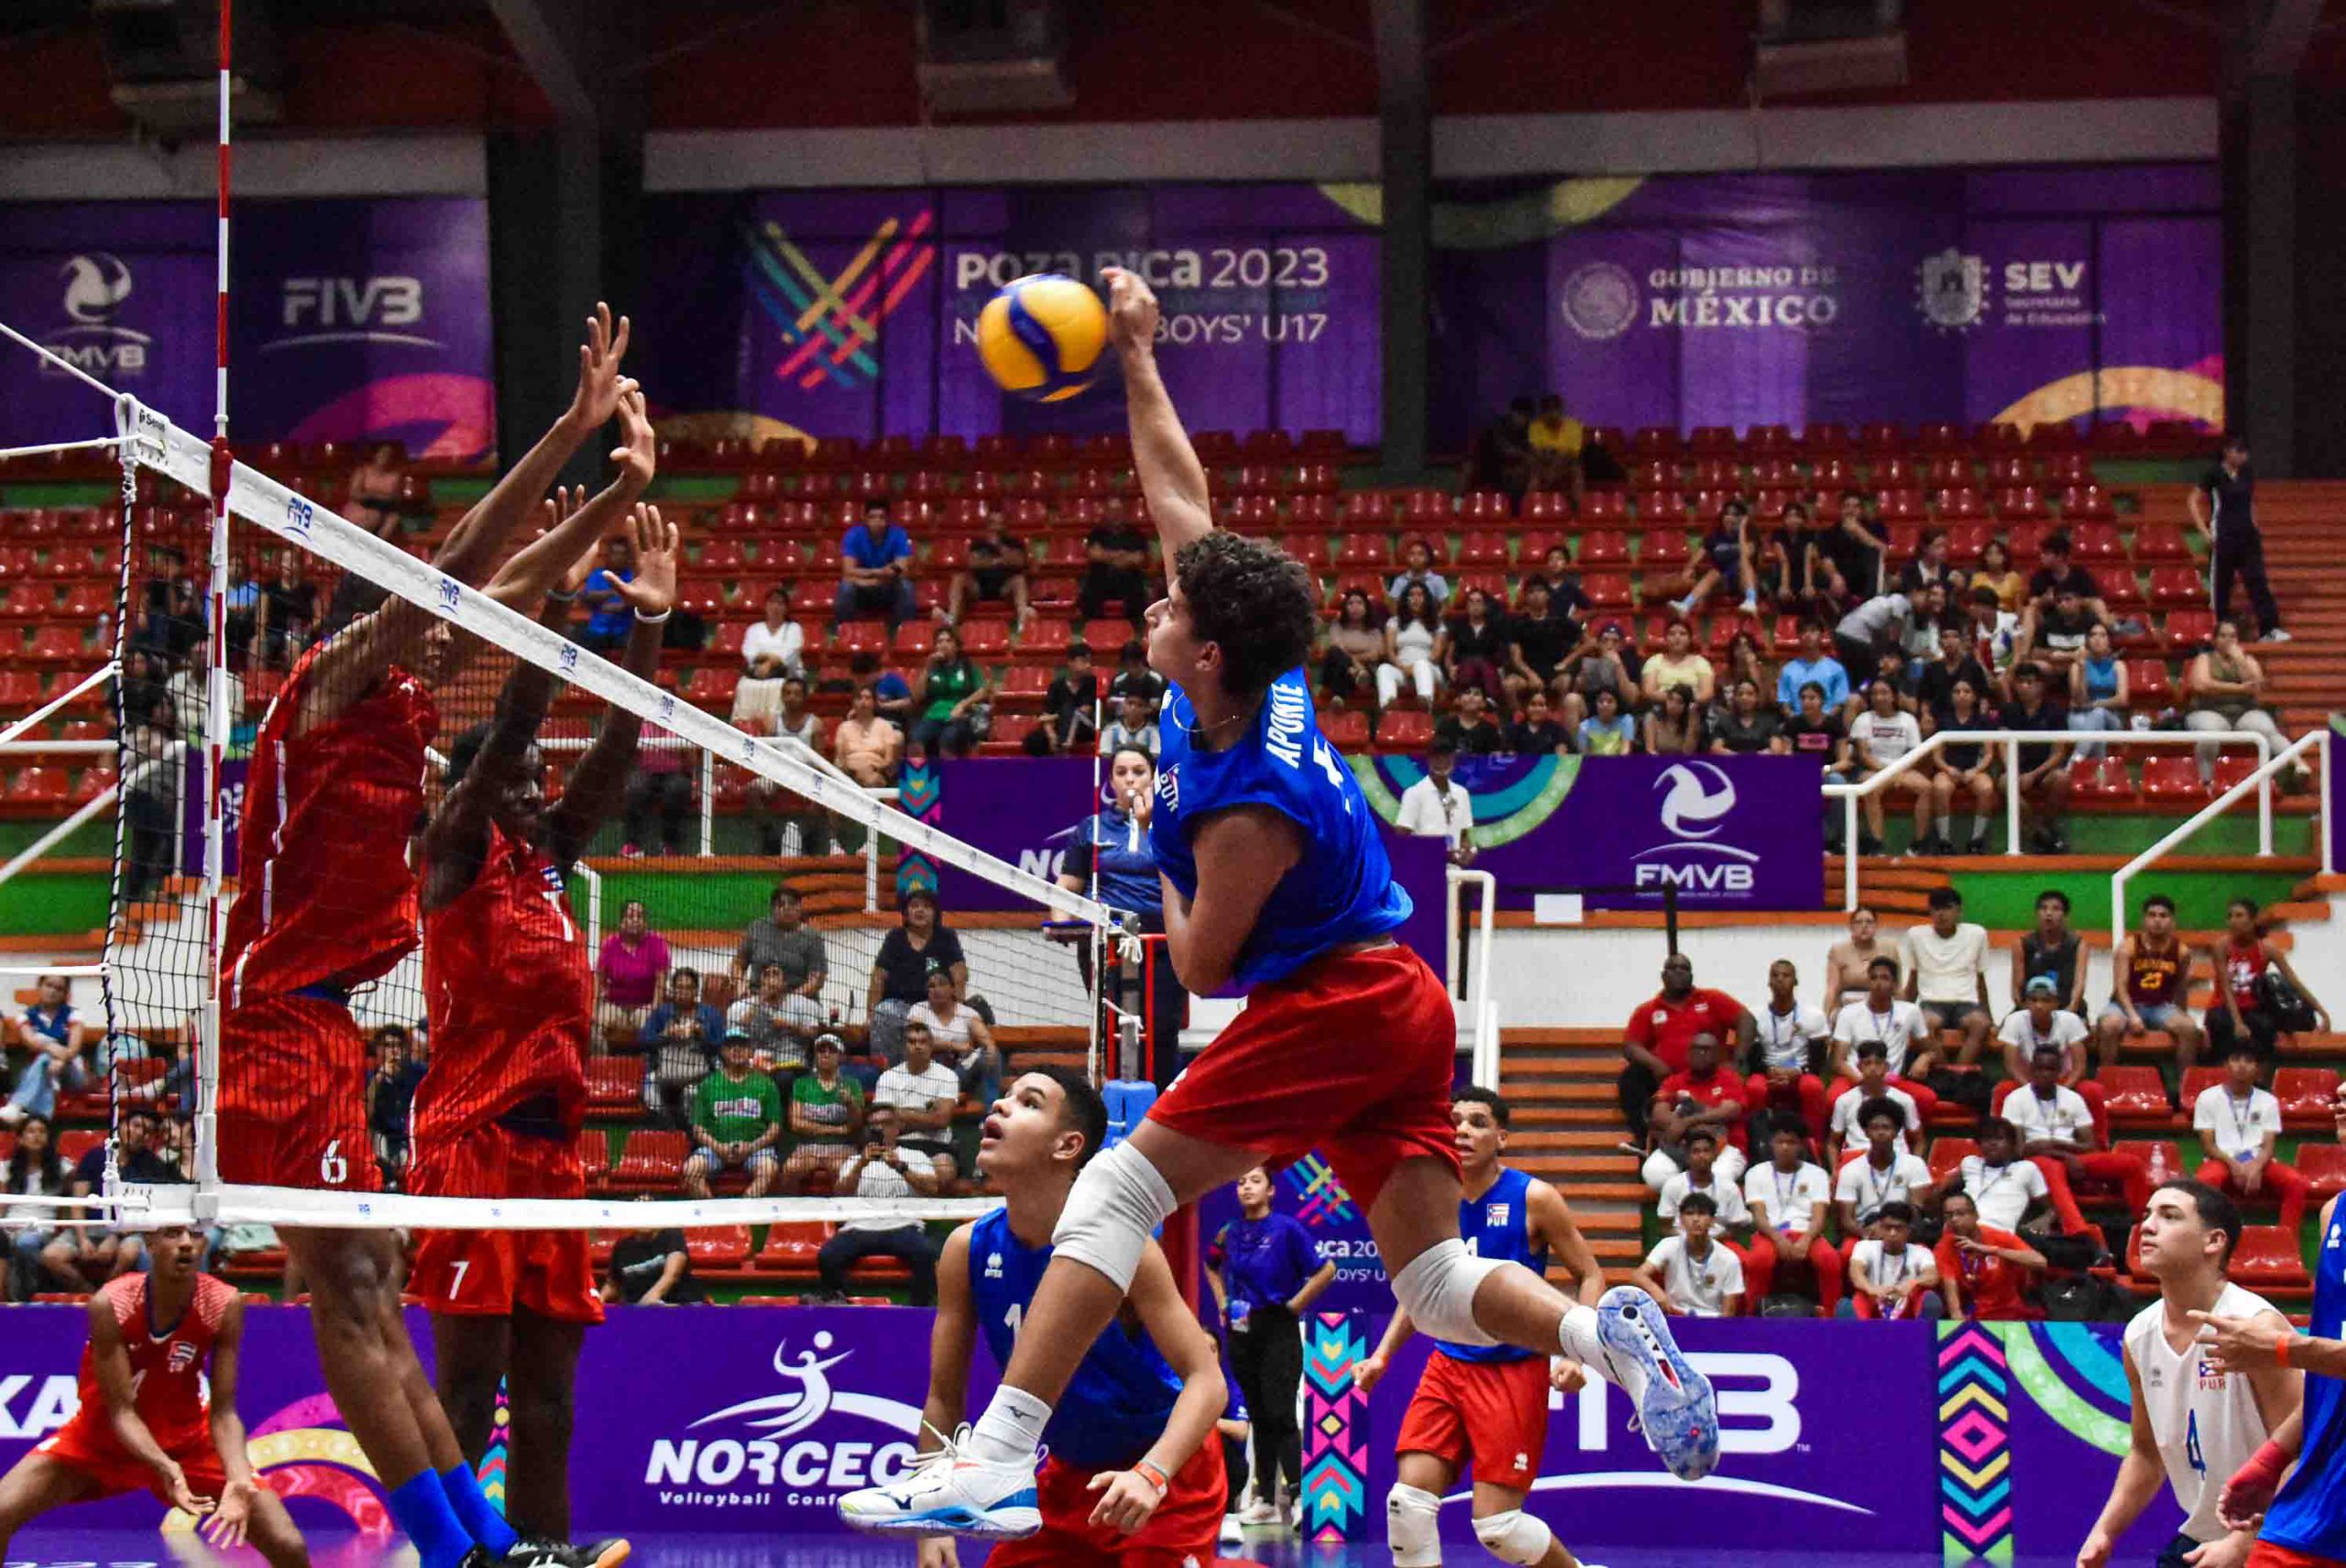 Puerto Rico wins five-set thriller to Cuba, both move into Semifinals